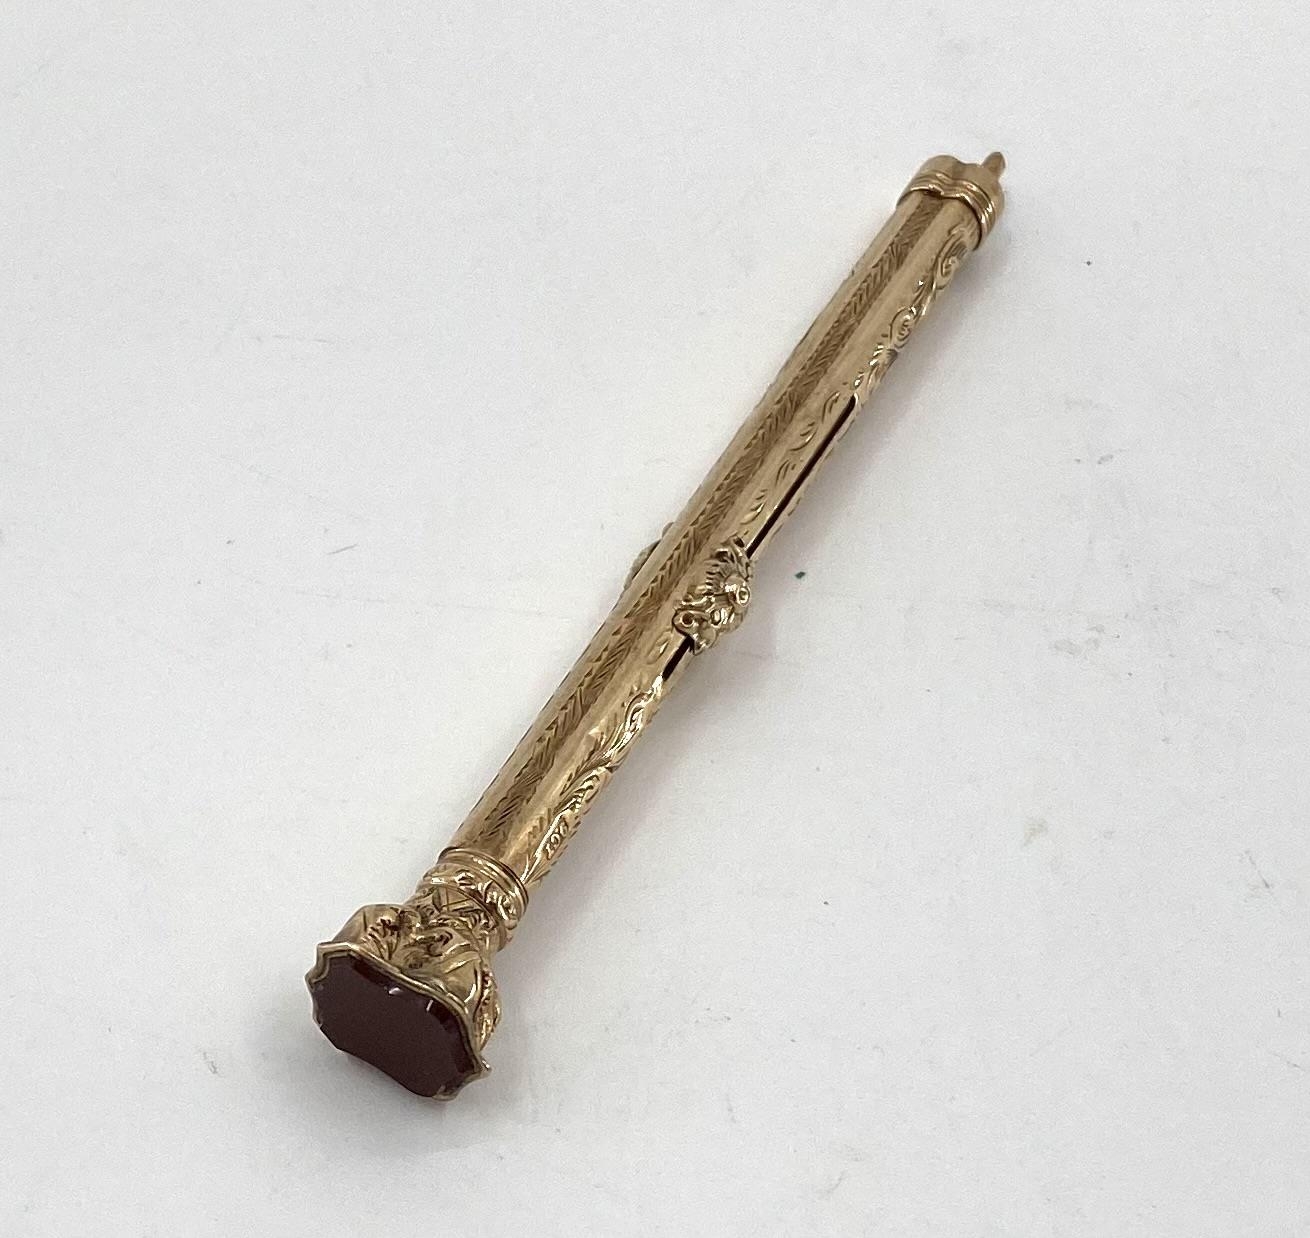 A 9ct gold propelling pencil with chased decoration, and shield shape carnelian top, 14.2g